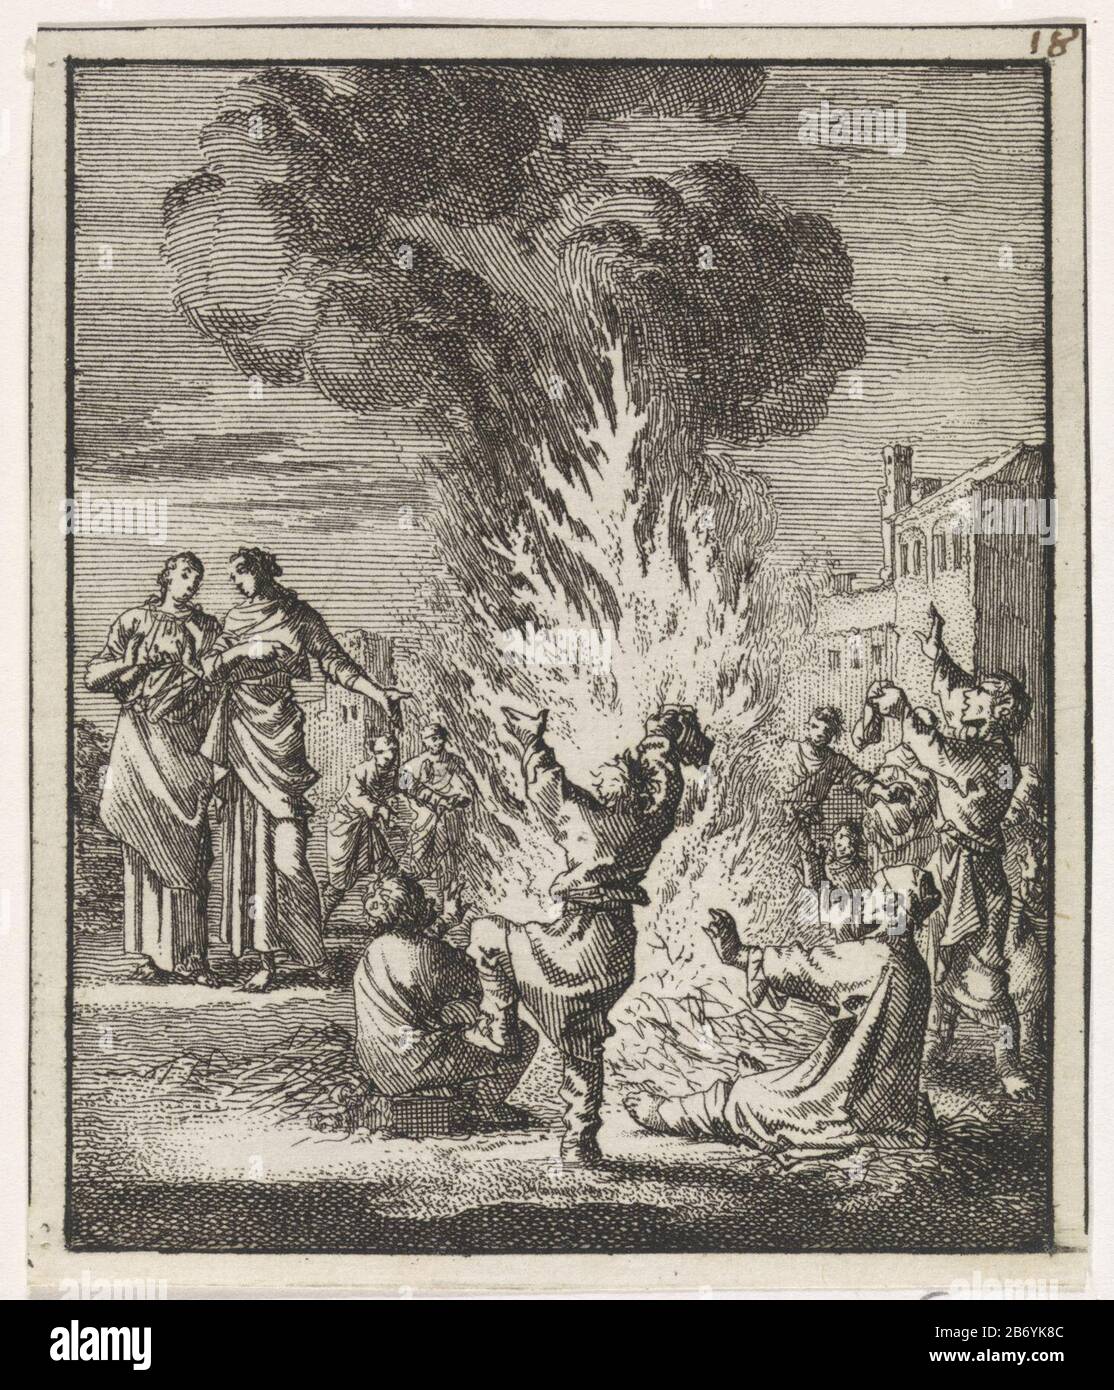 Kinderen dansend rond een opvlammend strovuur Children dancing around a blazing fire of straw object type: picture Item number: RP-P-OB-45.230Catalogusreferentie: Van Eeghen 3273 Inscriptions / Brands: collector's mark, verso, stamped: Lugt 2228nummer, recto, handwriting in brown ink: '18 Manufacture creator: printmaker Jan Luyken manufacture Place: Amsterdam Date: 1704 Physical features: etching; proofing material: paper Technique: etching dimensions: top: 93 mm × H 78 b mmToelichtingProefdruk of illustration of: Luyken, Jan. The zedelyke stichtelyke and chants. Amsterdam: Wed. Pieter Arentsz Stock Photo